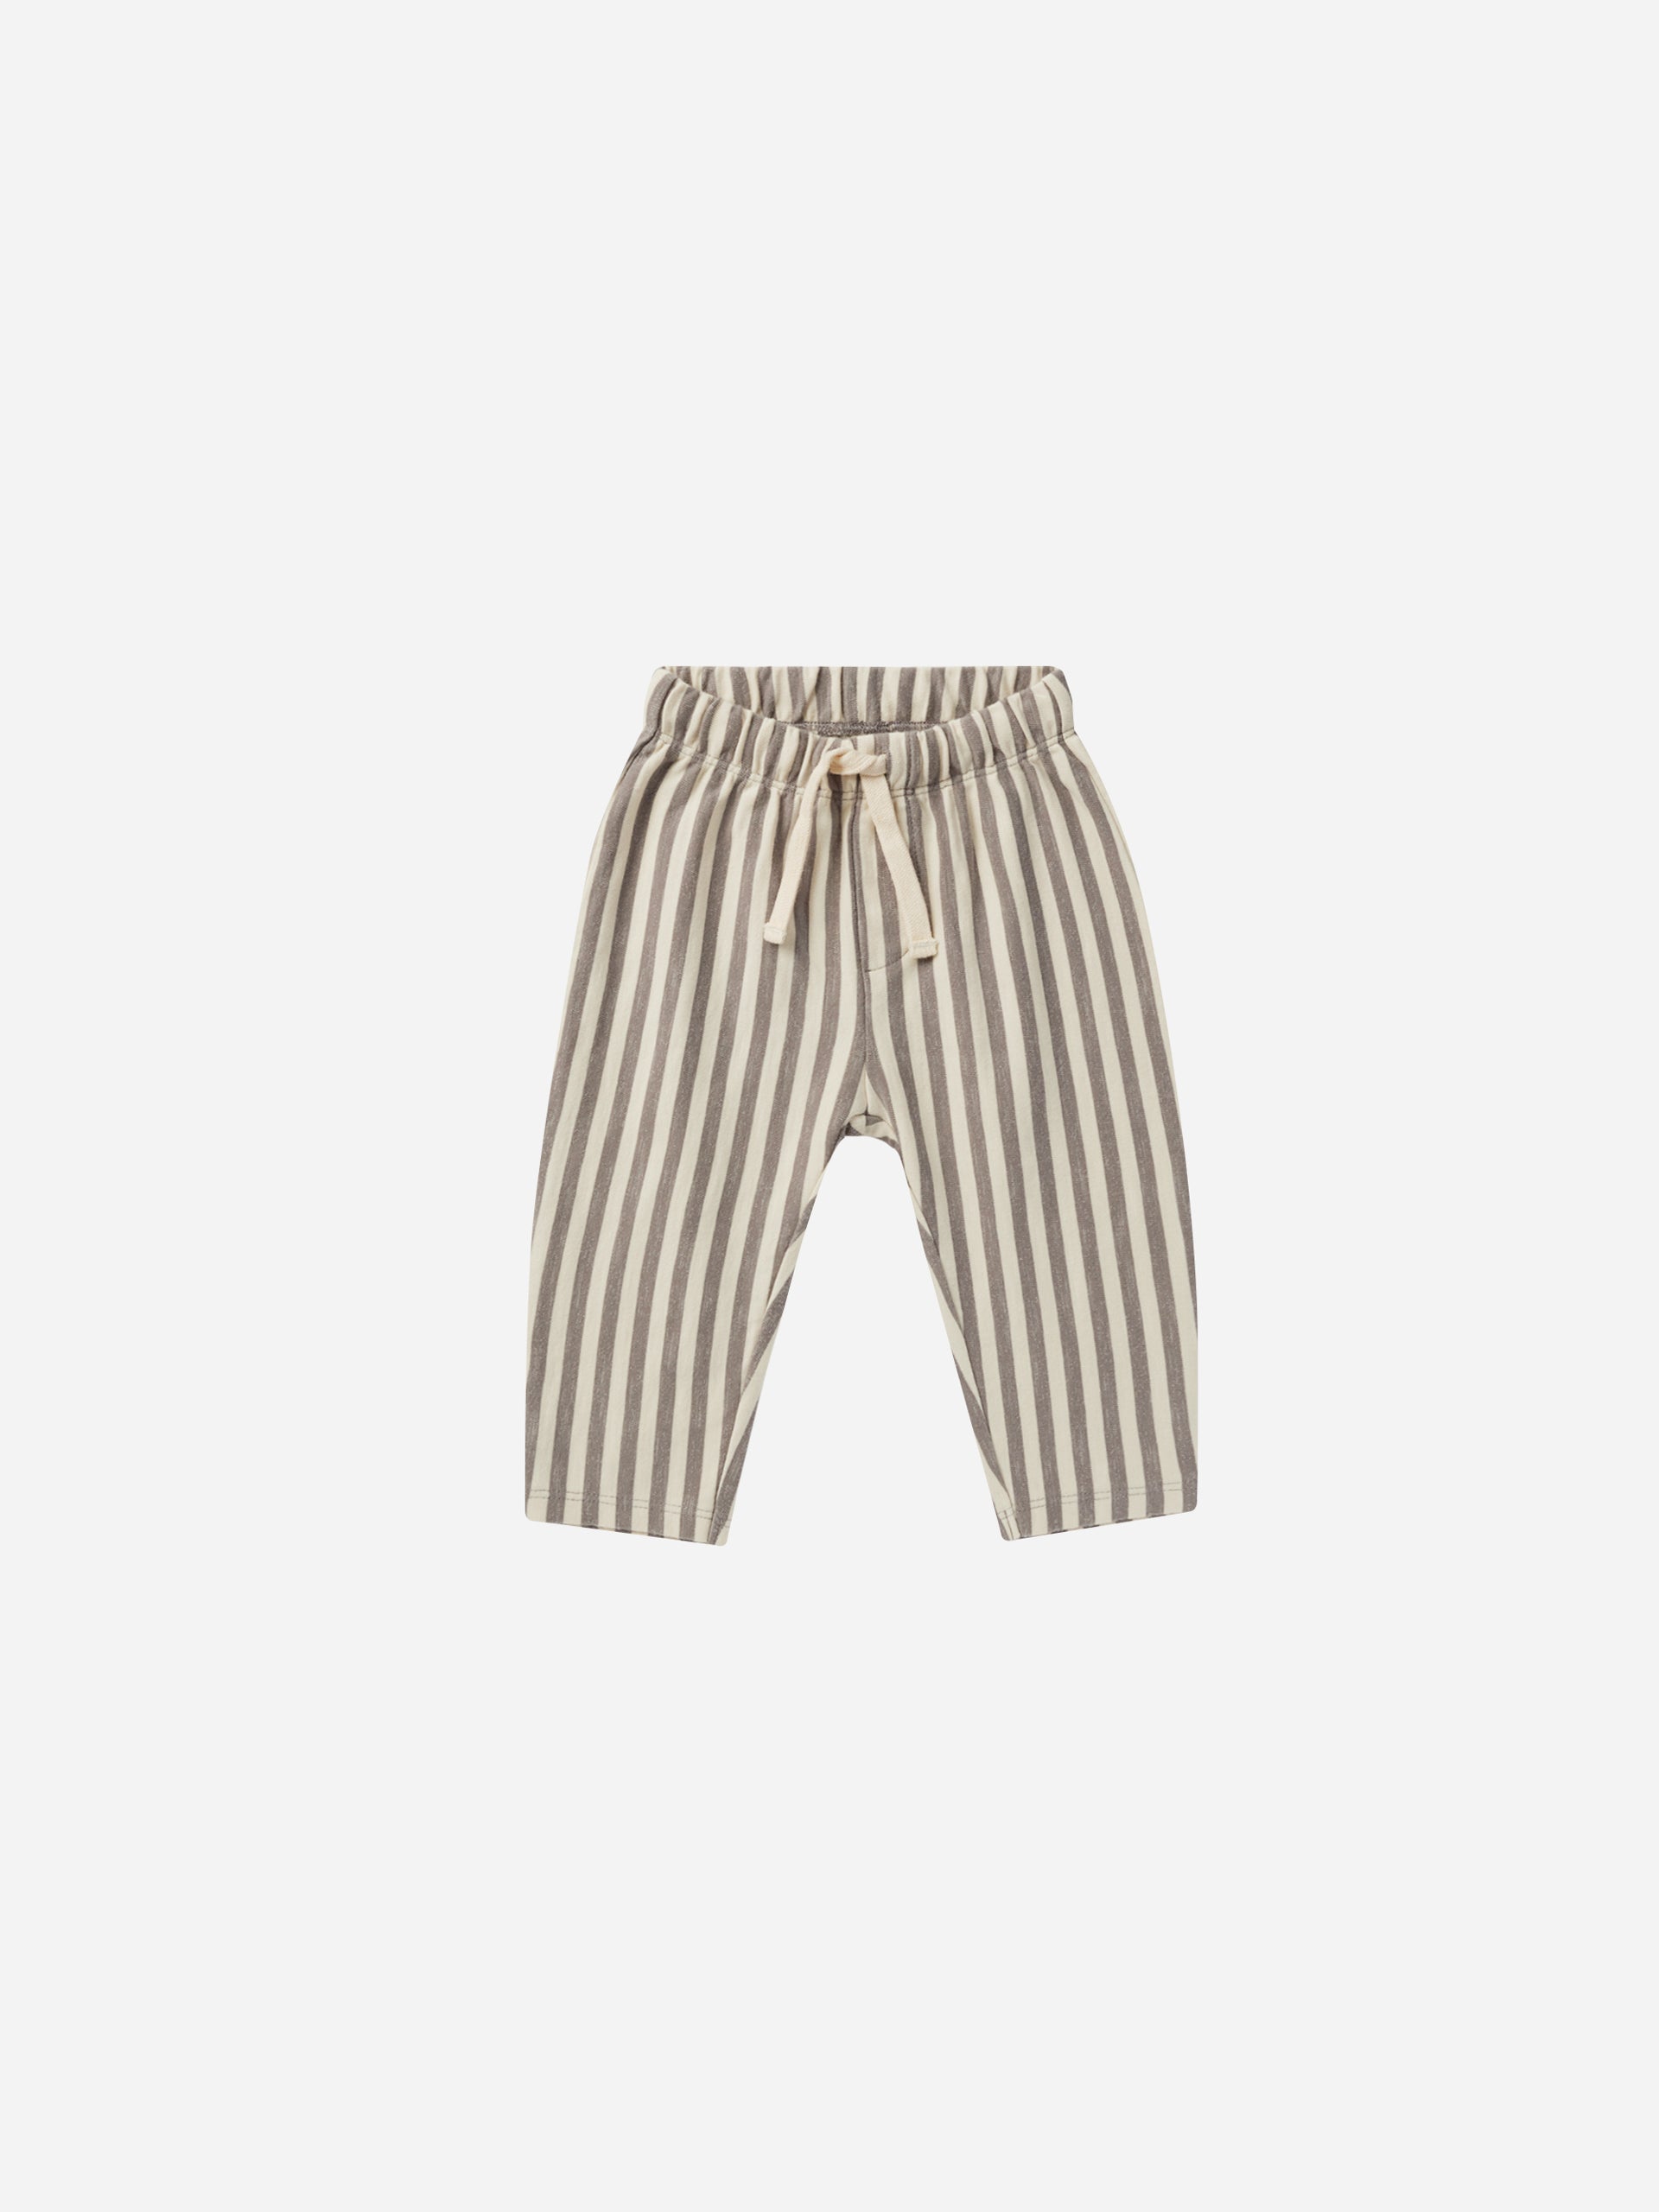 Rory Pant || Charcoal Stripe - Rylee + Cru | Kids Clothes | Trendy Baby Clothes | Modern Infant Outfits |